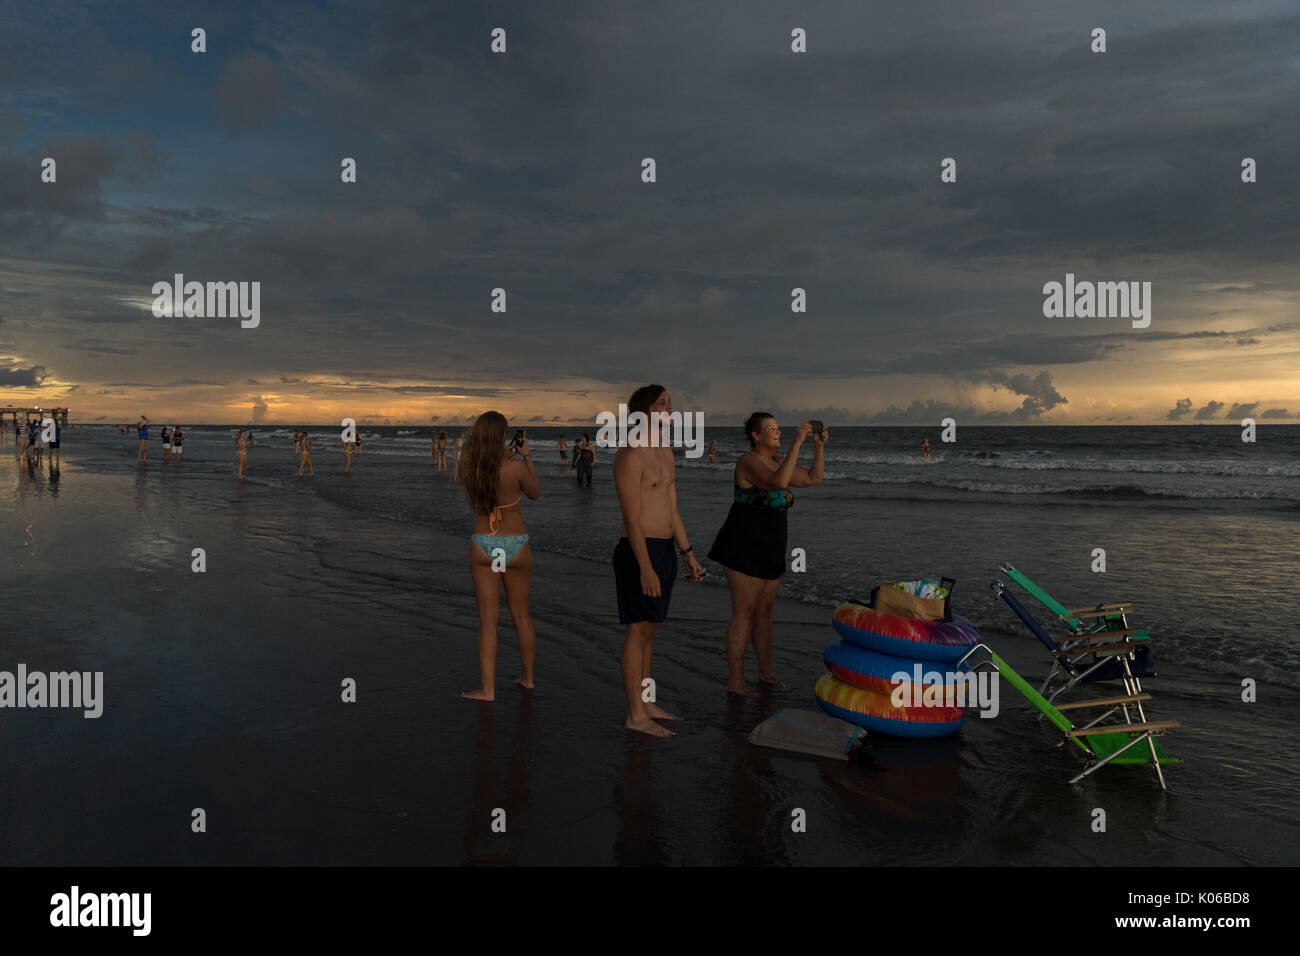 Charleston, Isle of Palms, USA. 21st Aug, 2017. Darkness takes over the day as the solar eclipse reaches totality along the beach outside Charleston August 21, 2017 in Isle of Palms, South Carolina. The solar eclipse after sweeping across the nation crosses the Charleston area before heading over the Atlantic Ocean. Credit: Planetpix/Alamy Live News Stock Photo